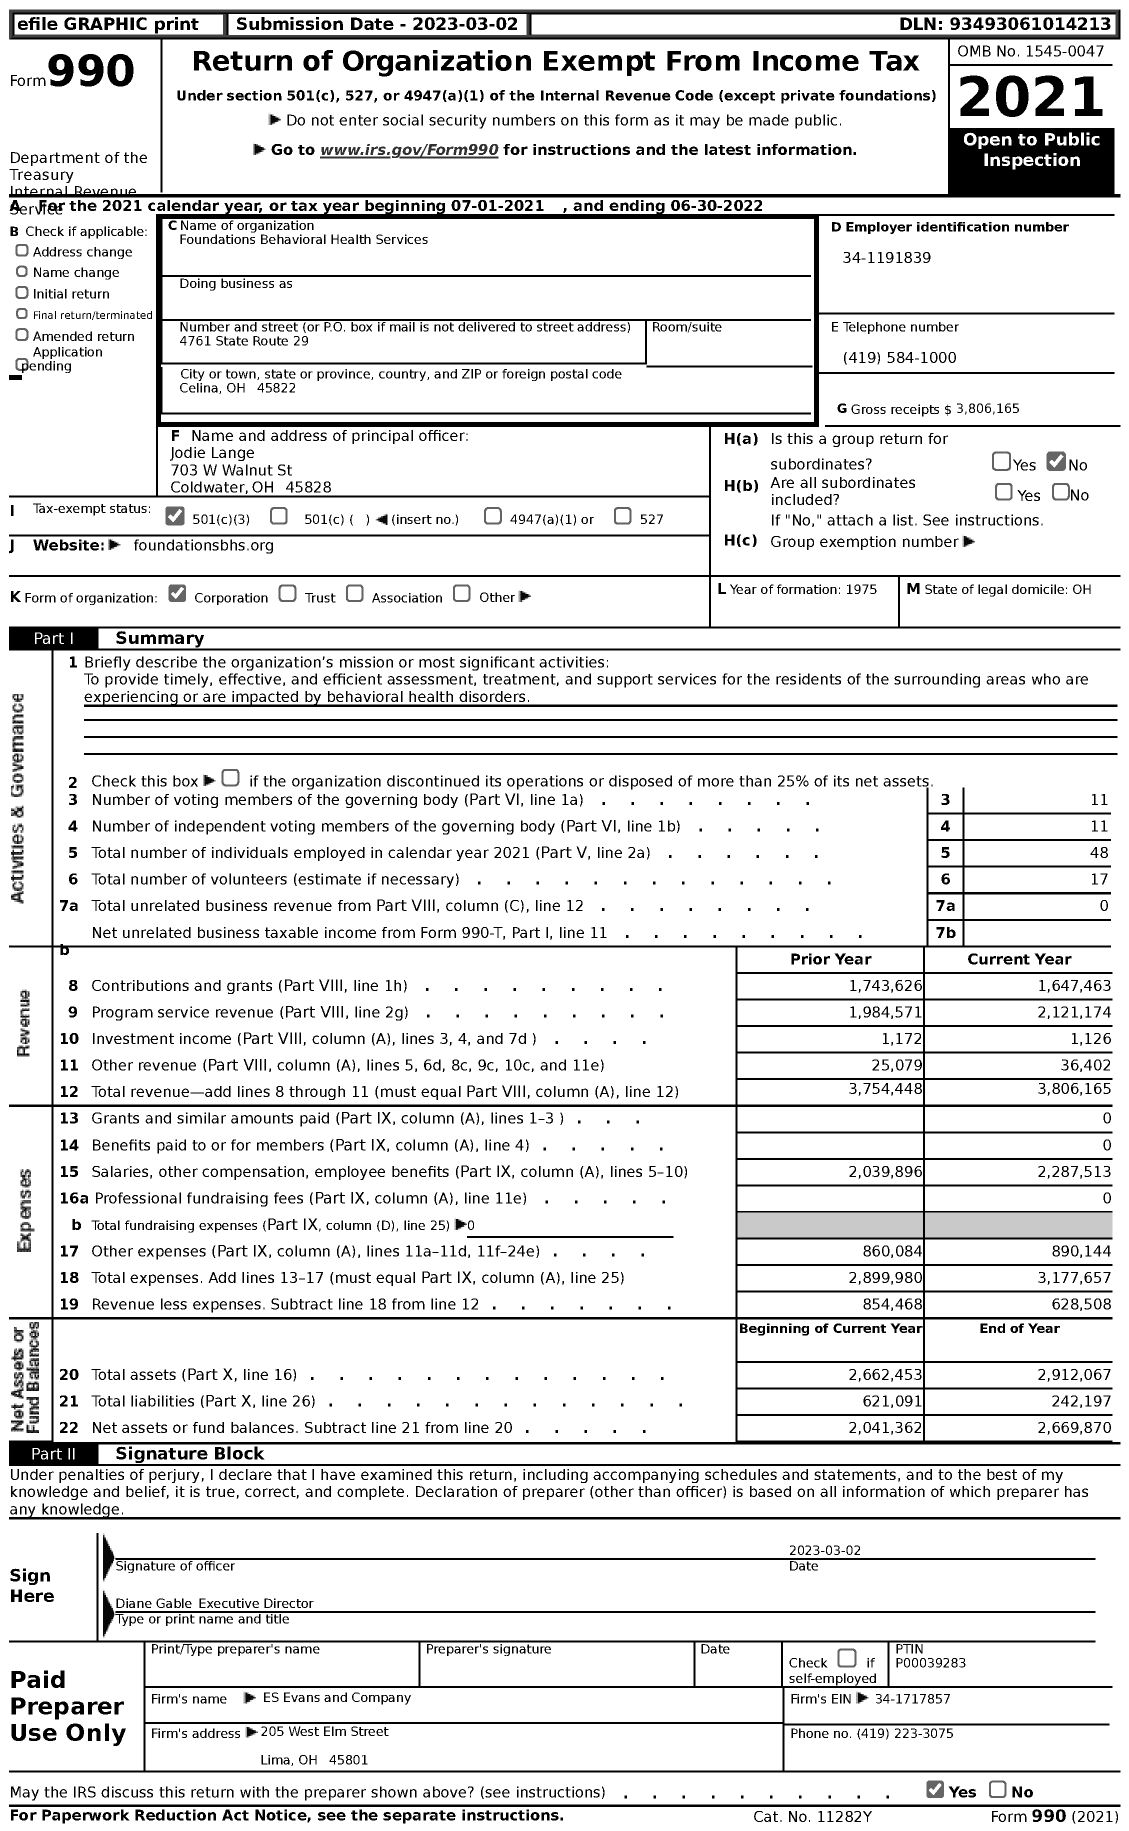 Image of first page of 2021 Form 990 for Foundations Behavioral Health Services